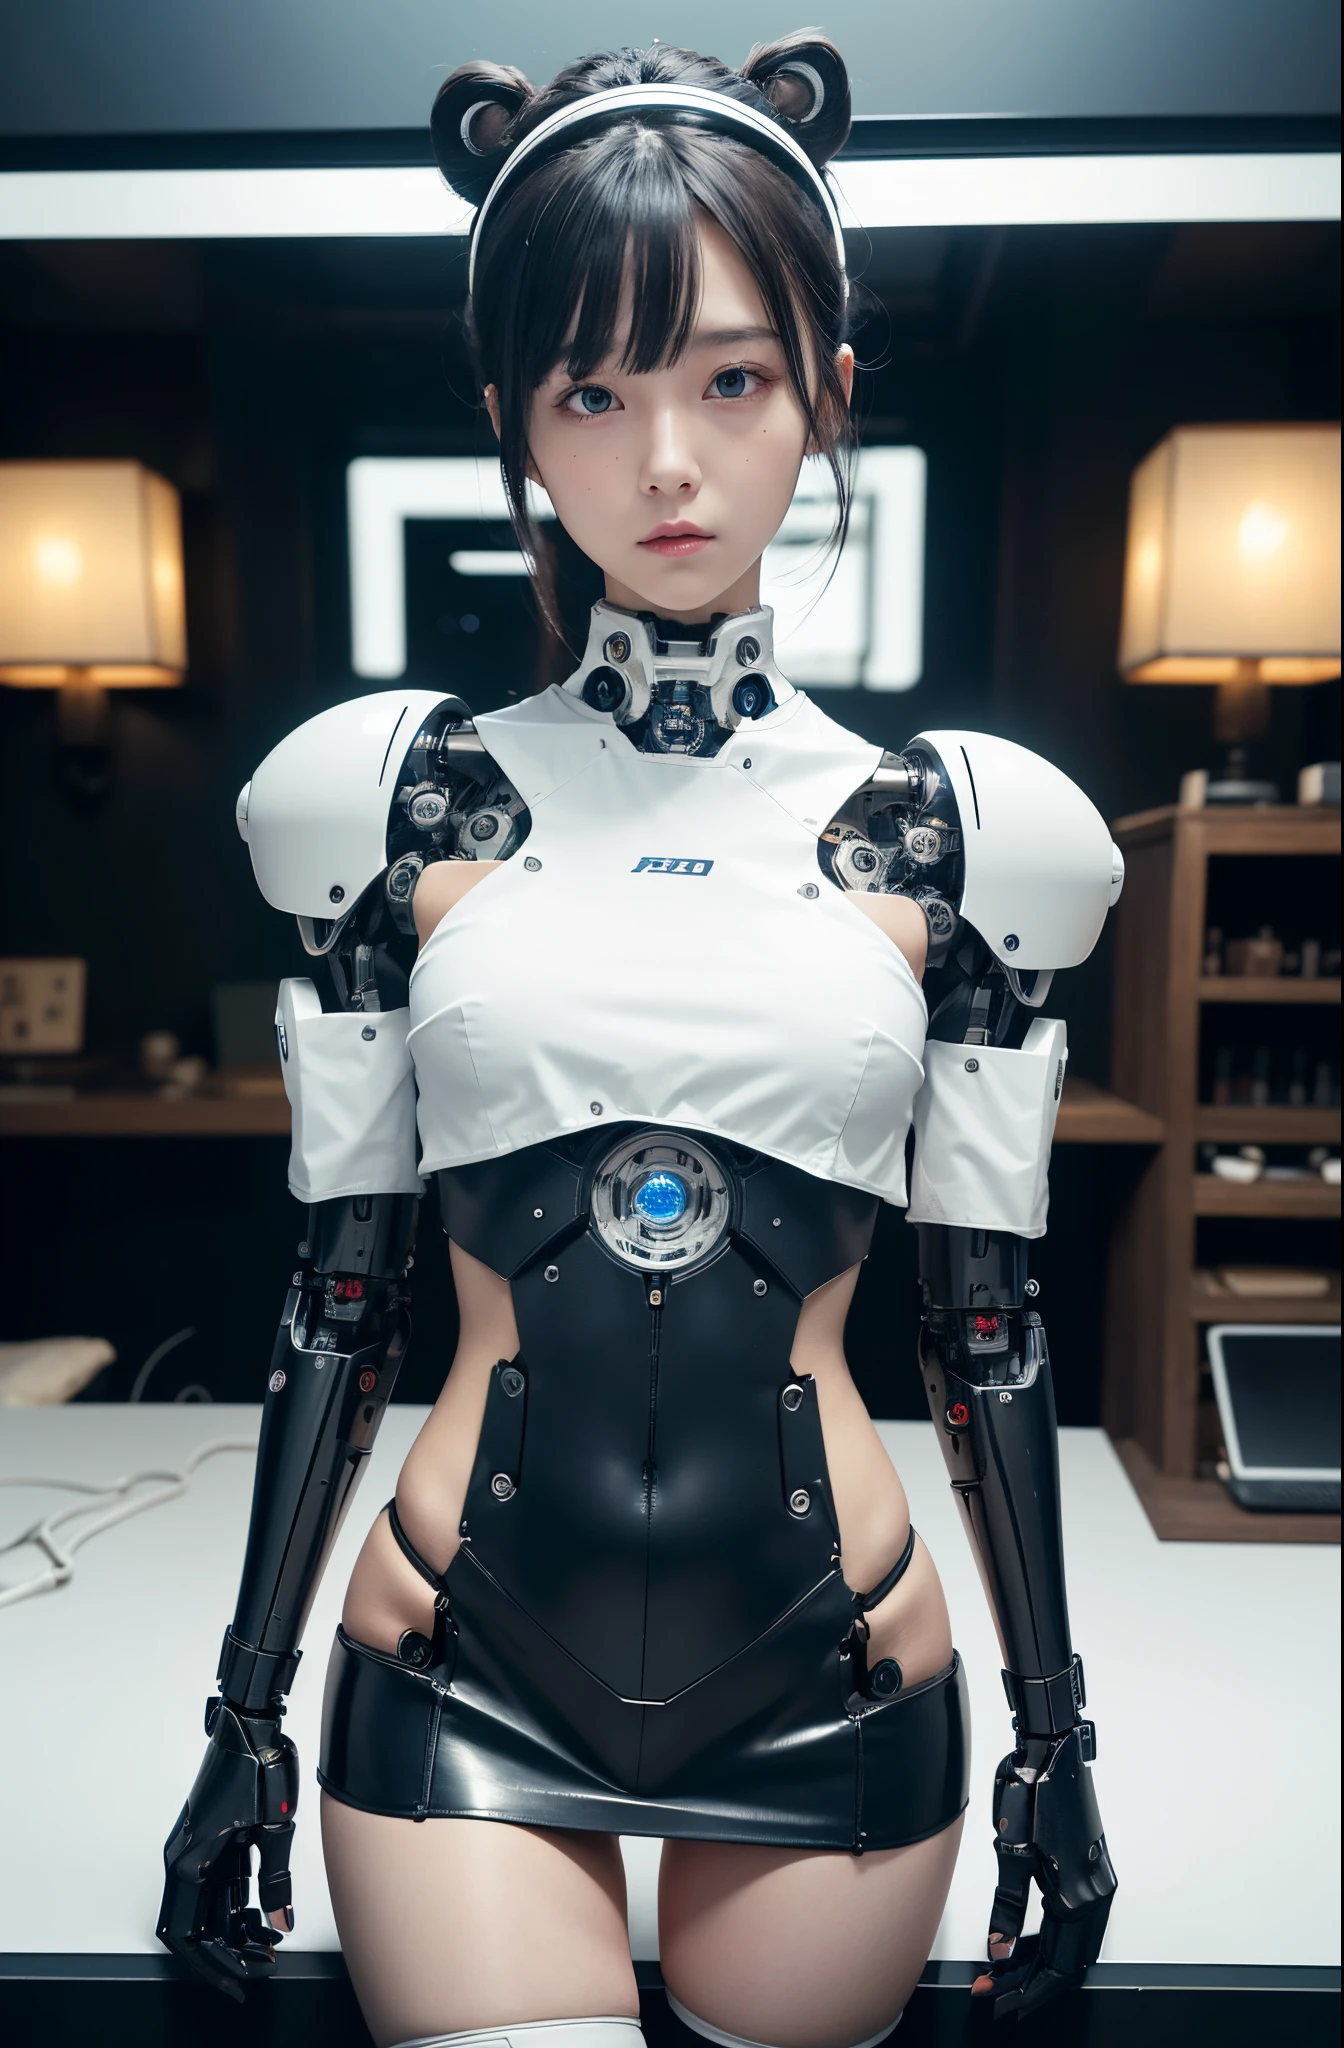 masutepiece, Best Quality, Extremely detailed, (Photorealistic:1.4),(Raw photo) (8K, 4K, Best Quality, hight resolution, 超A high resolution:1.1), (masutepiece, Realistic, Photorealsitic:1.1), 1girl in, Japaese Cyborg highschool Girl,Plump ,Navy Pleated Mini Skirt,Black tights,control panels,android,Droid,Mechanical Hand, ,Robot arms and legs, Black Robot Parts,Black hair,Mechanical body,Blunt bangs,White abdomen,White Robotics Parts,perfect robot woman,The laboratory of the future,cyberpunked,Charging spot,android factory,Robot Factory,cyborg factory,Long Tube,A thick cable connects her neck,ceramic body ,complete eyes,Striking eyes,Mechanical body, head antenna,lod antenna on the head,mechanical ear covers,android,robot humanoid,japanese shighchool girl uniform